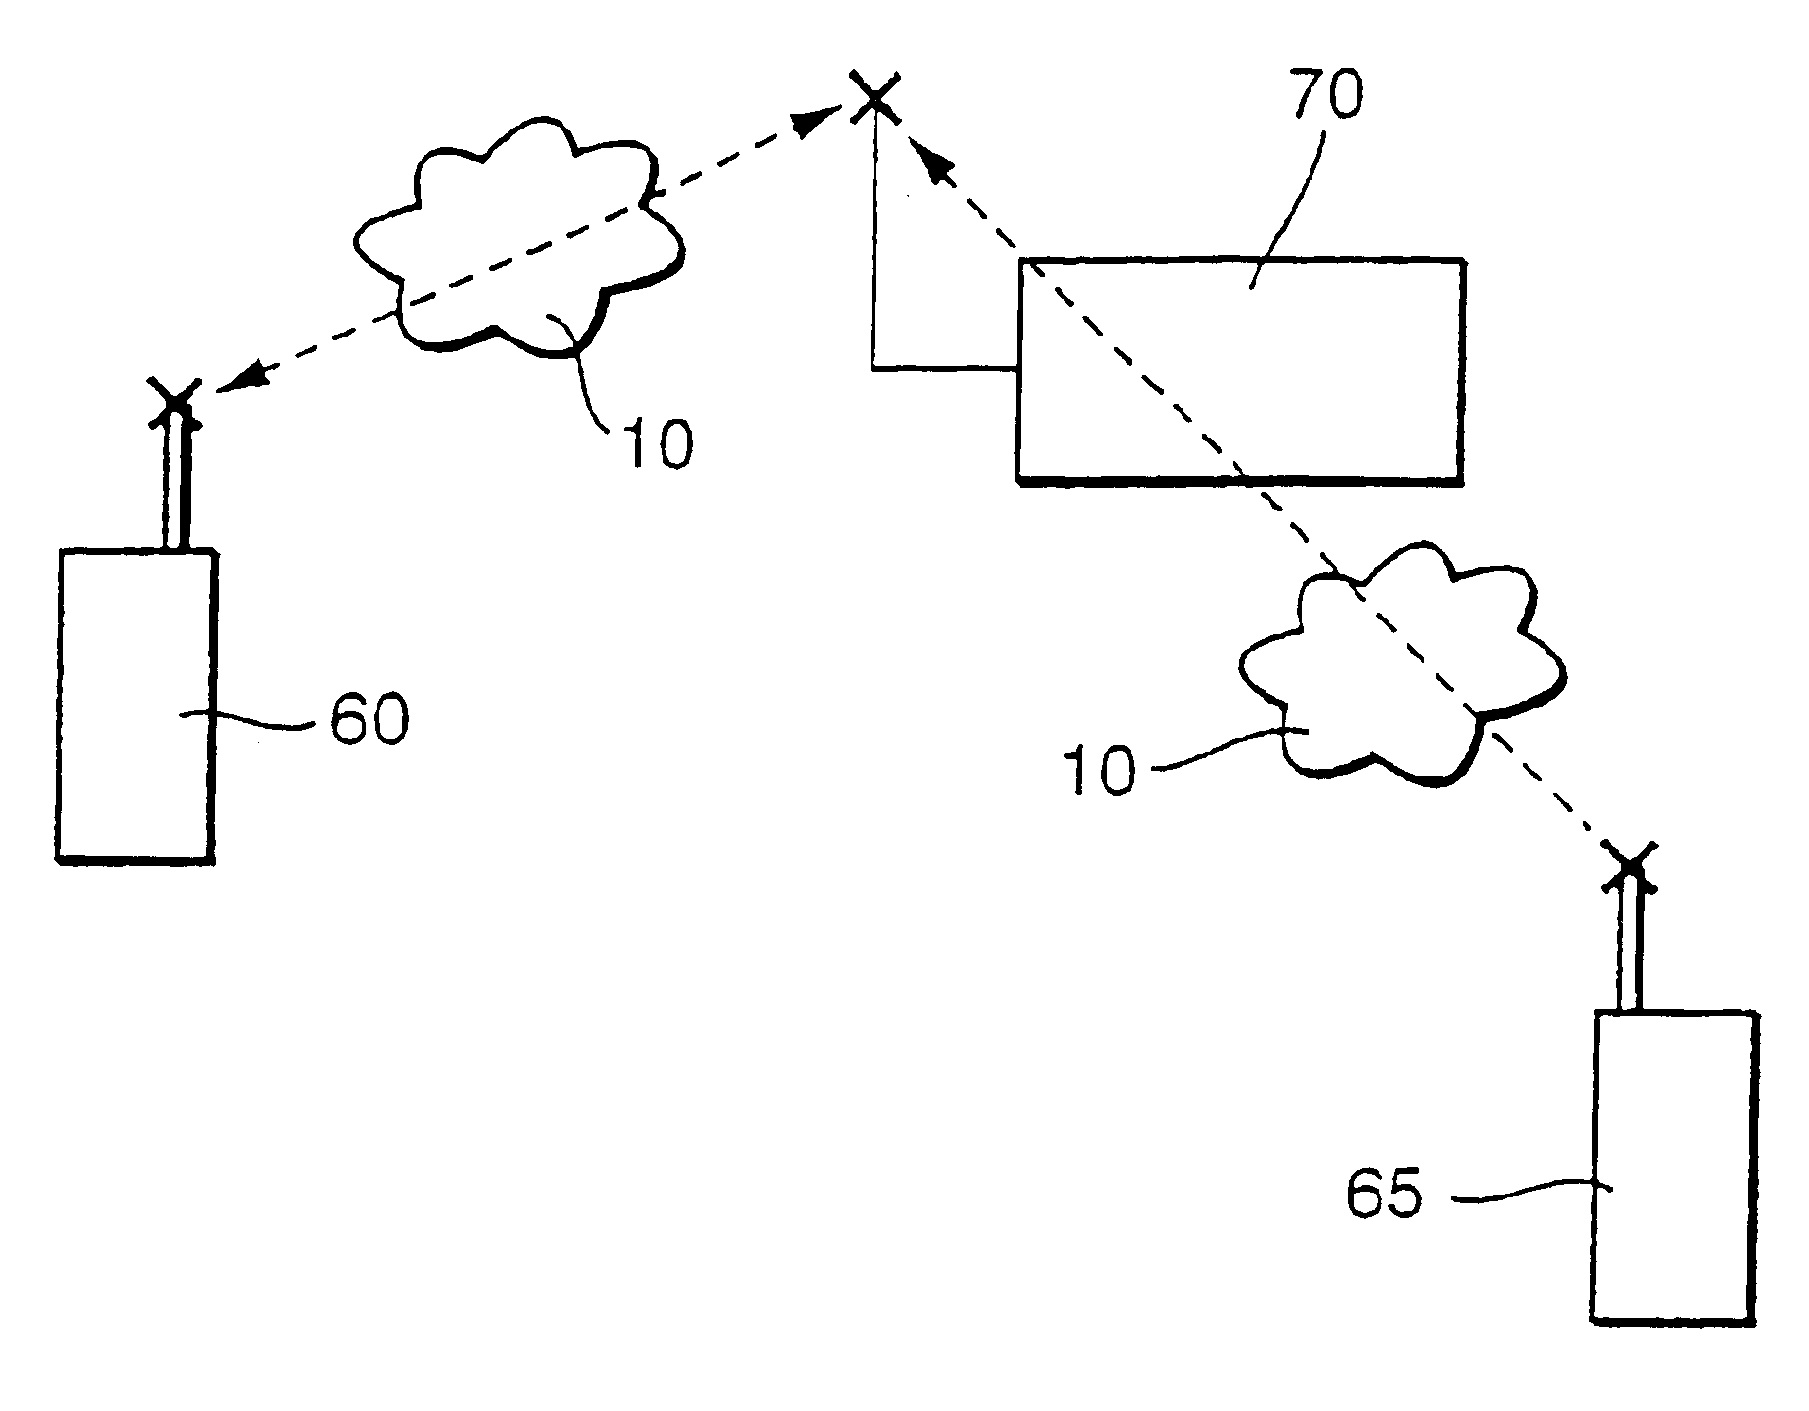 Transmission frame and radio unit for transmitting short messages with different data format